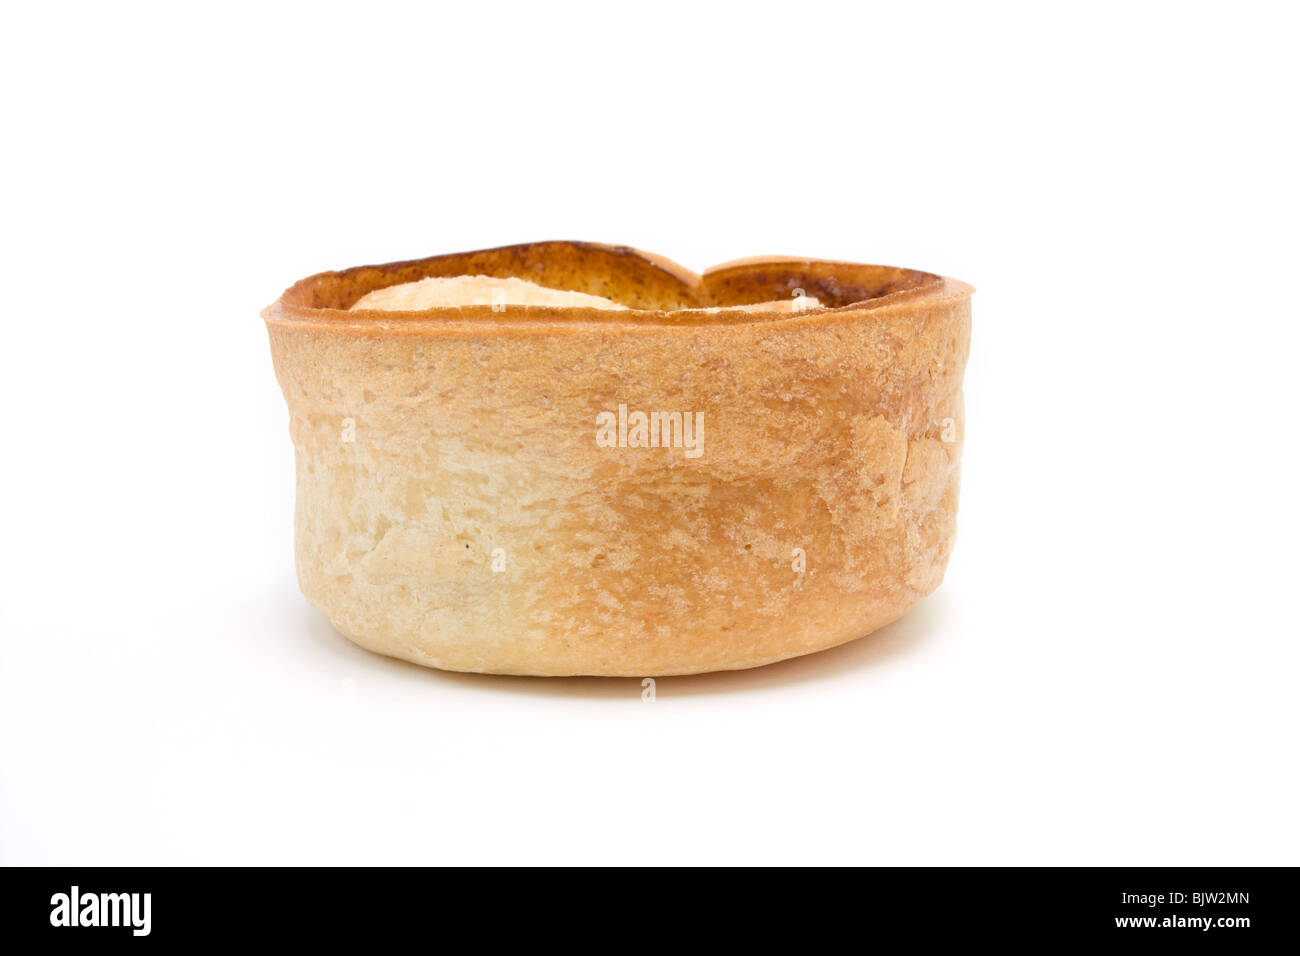 Small round scottish style Steak and Gravy Pie isolated against white background. Stock Photo